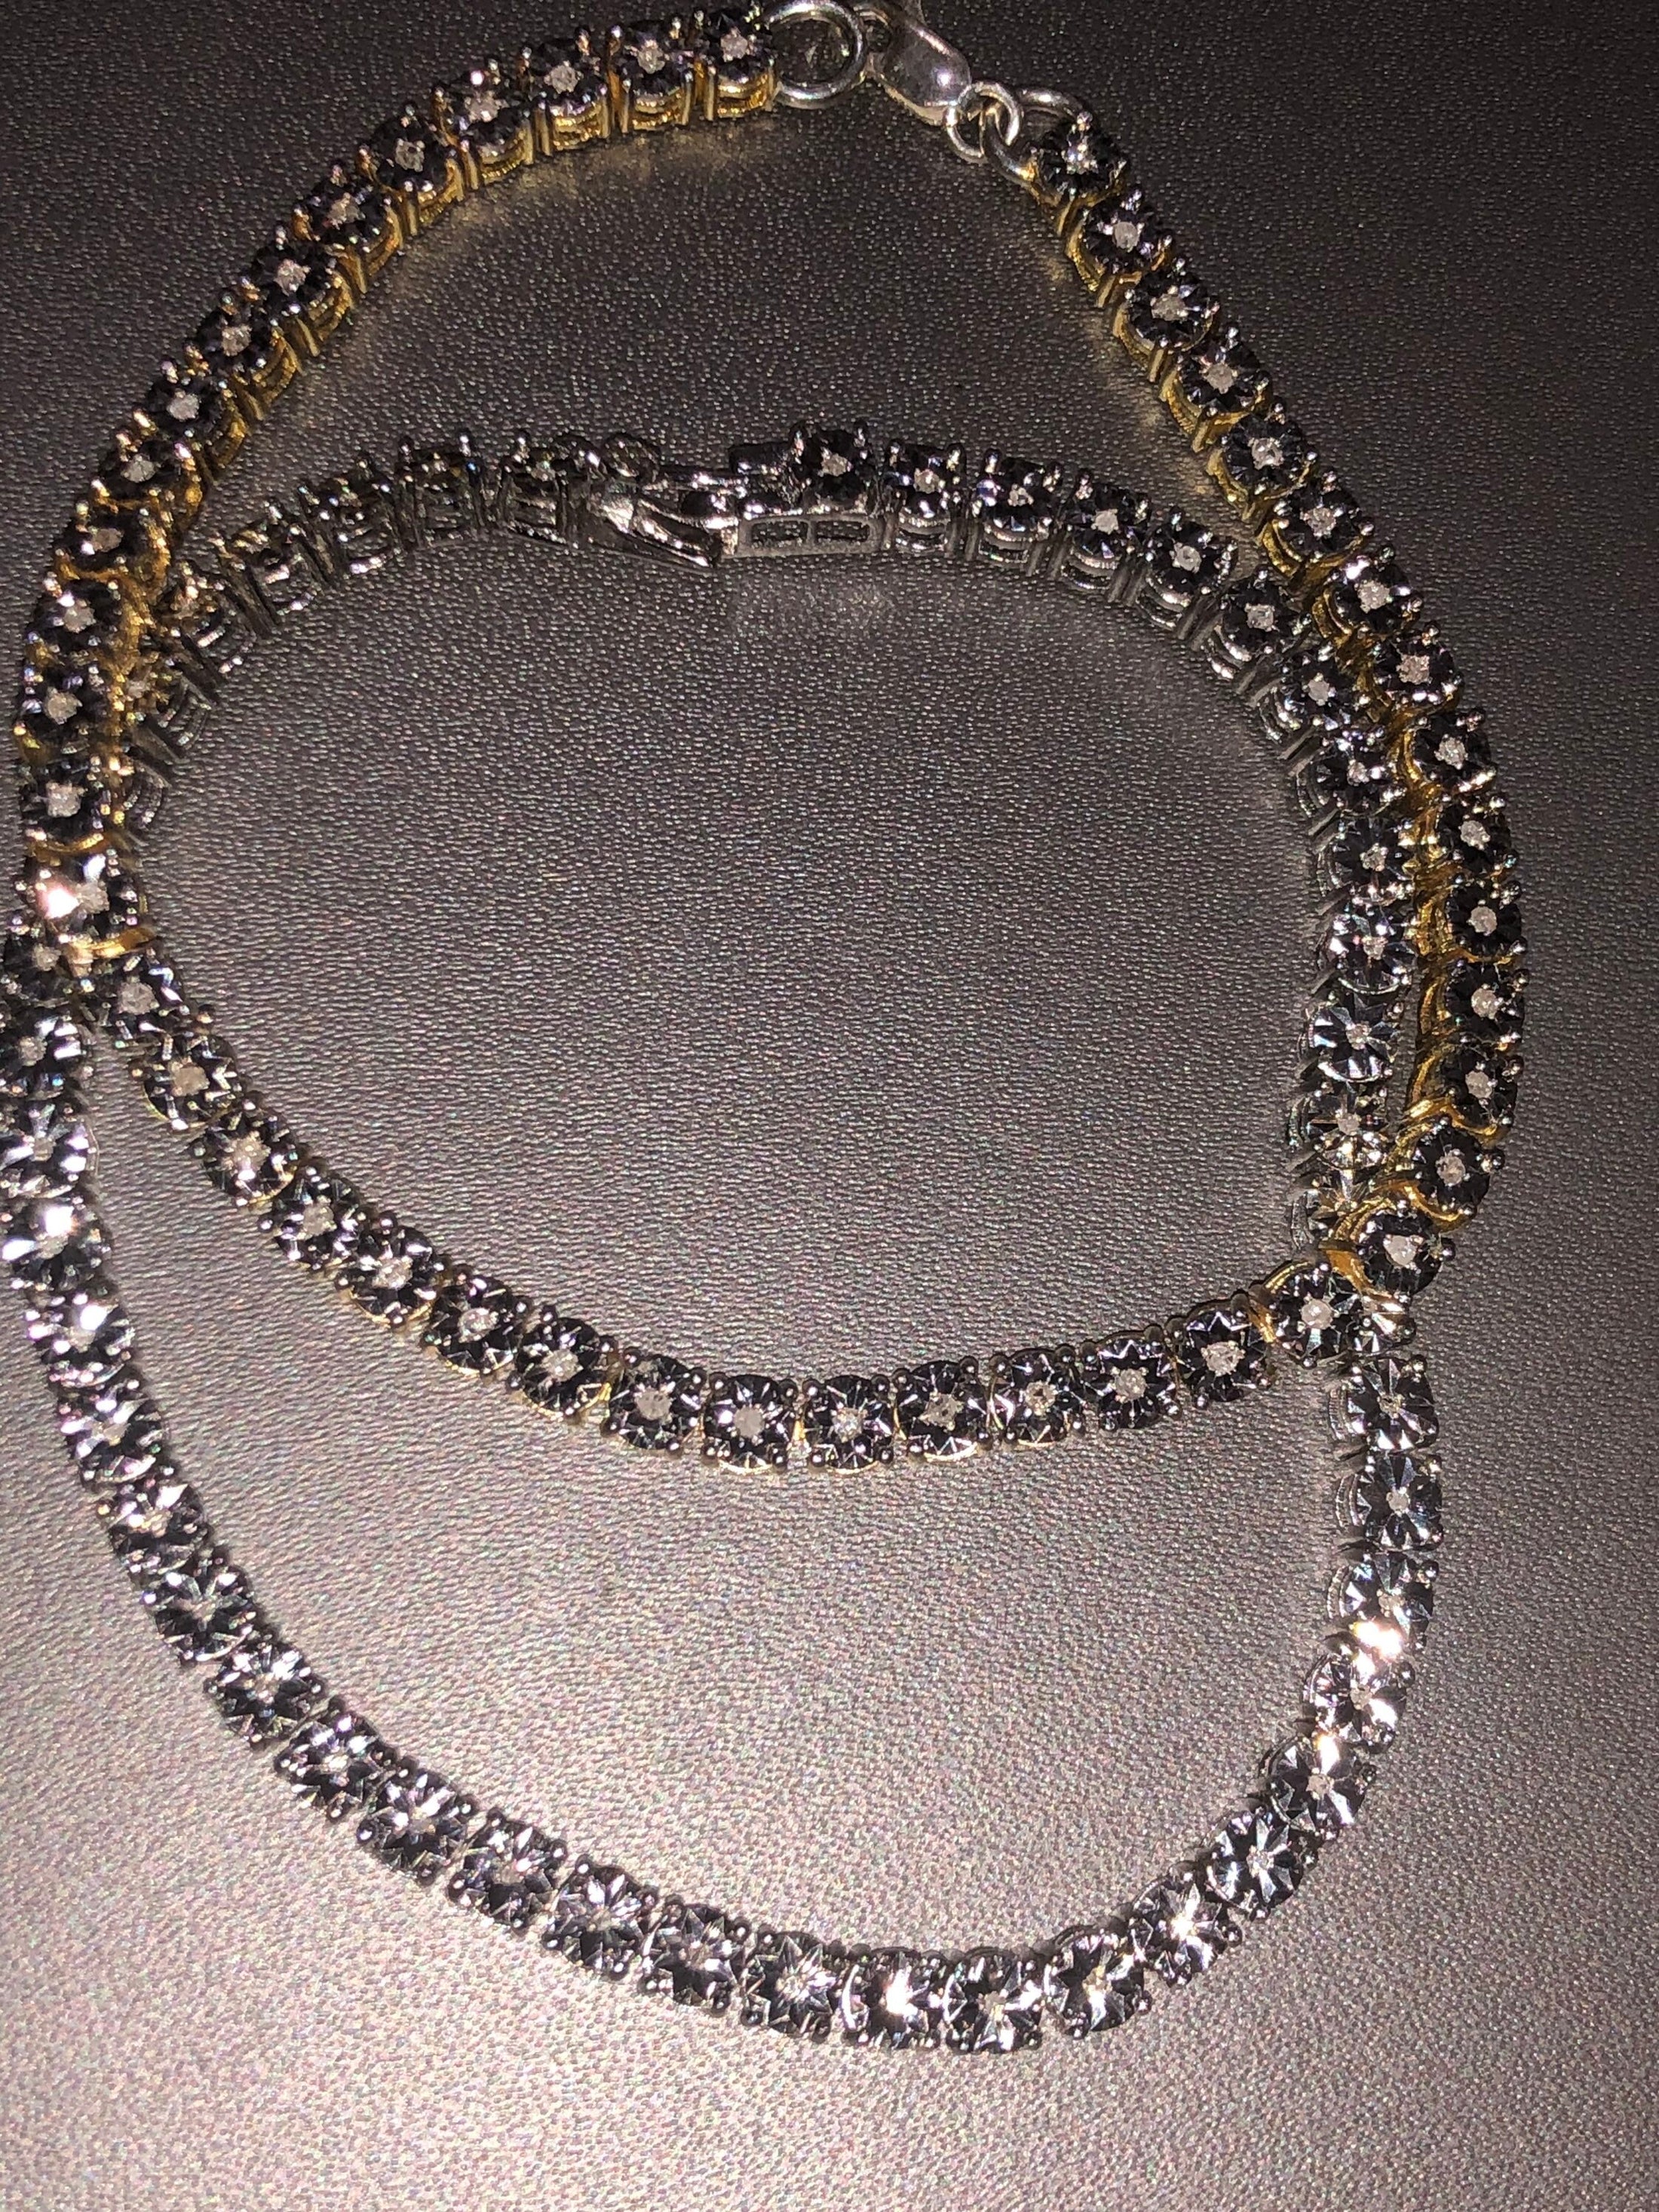 Biggest Semi Annual deal ever Real diamond tennis bracelets on sale till Friday Free real diamond Watch w/ all purchases! Authenticity incl